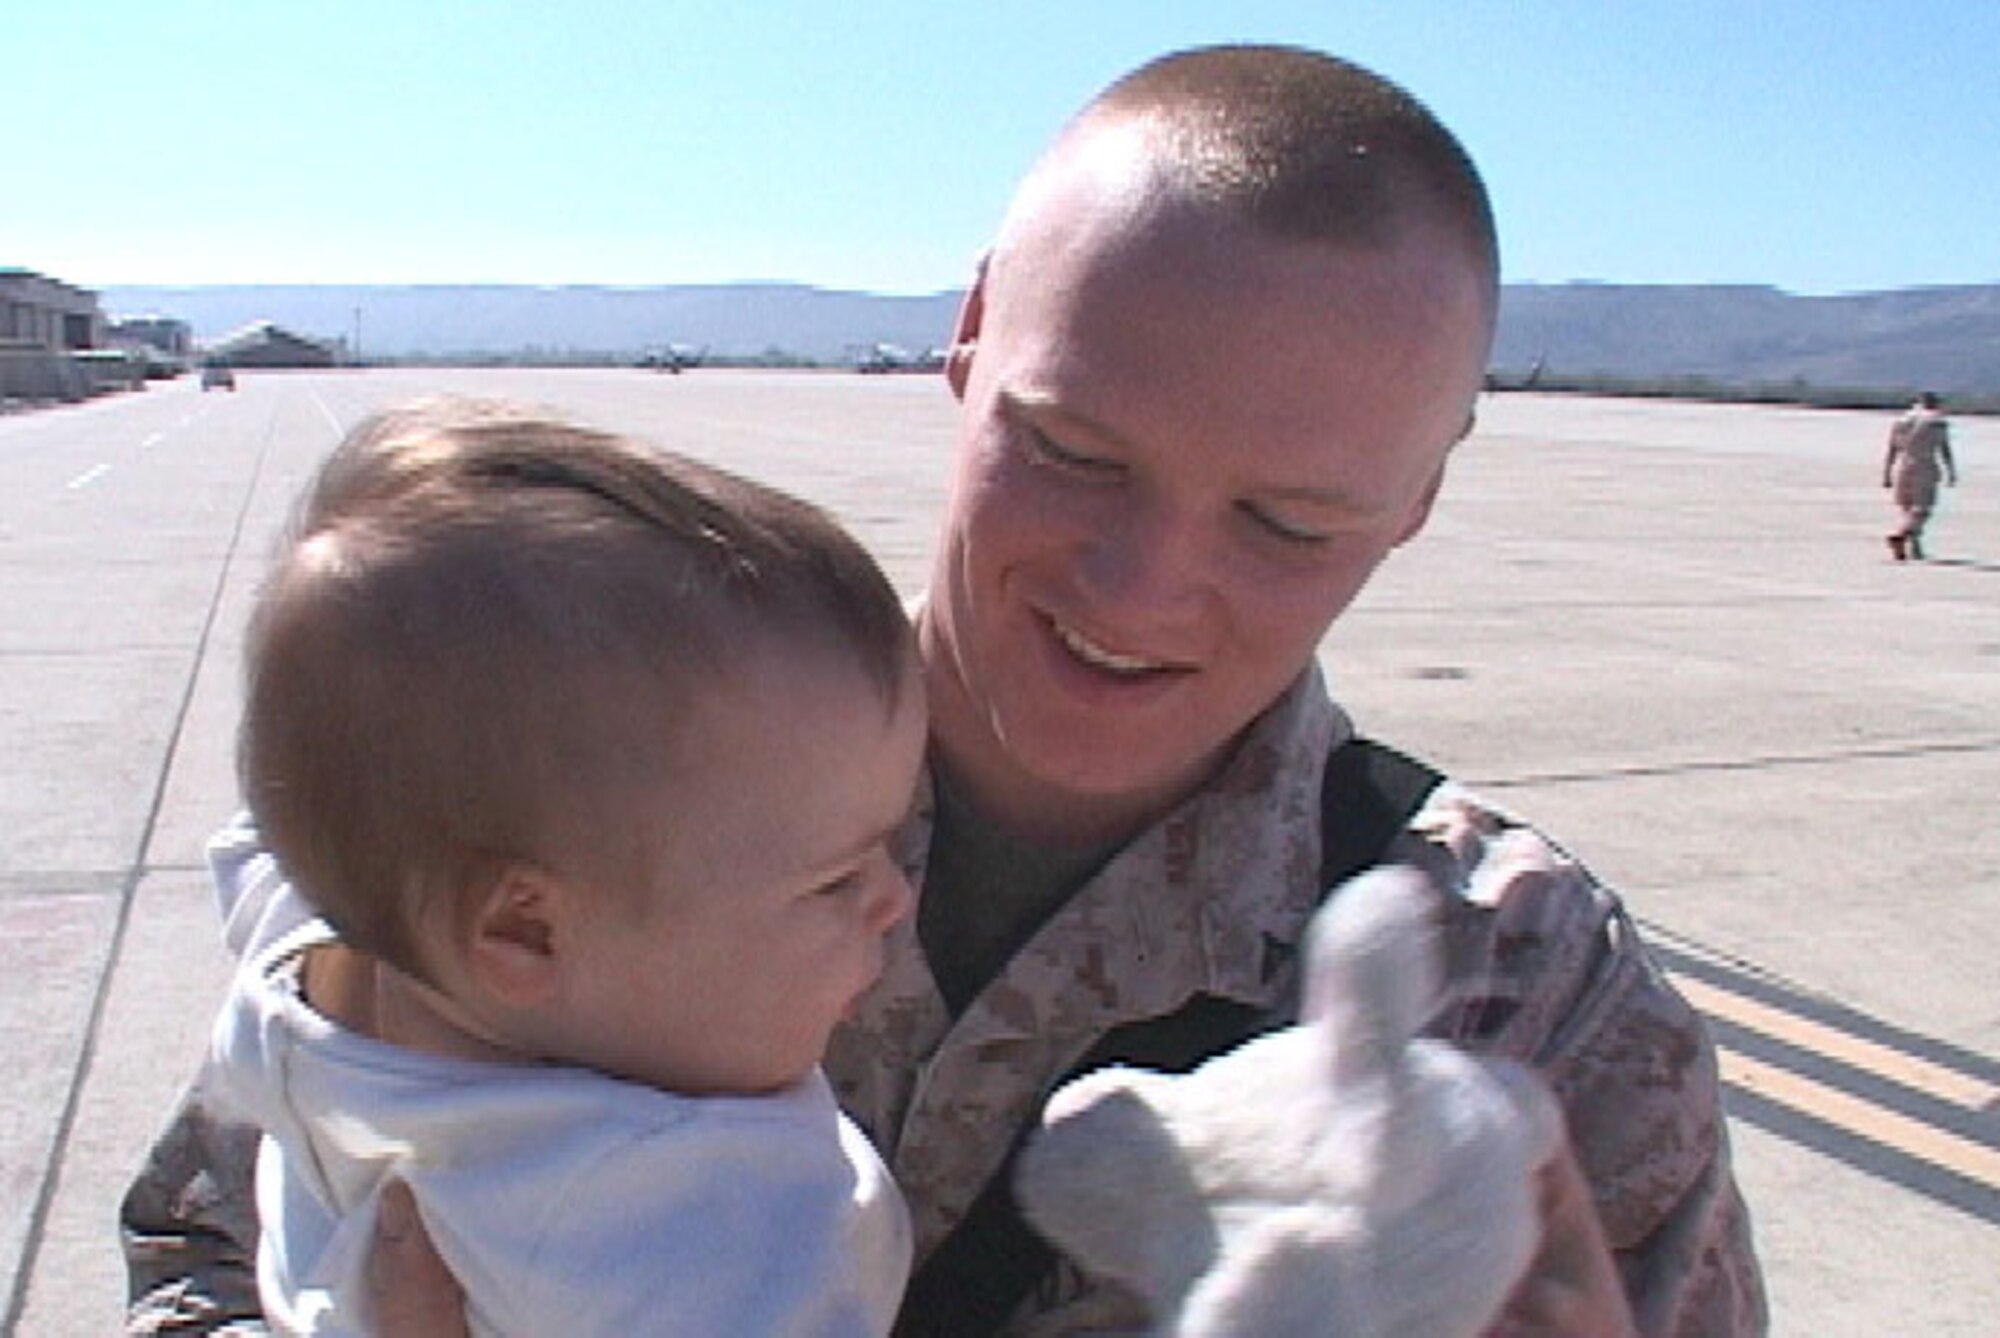 A Marine holds his baby daughter on teh tarmac at Marine Corps Base Camp Pendleton California March 15. The Marine was a member of the rear detachment from Marine Medium Helicopter Squadron 364 returning home following a seven month deployment to Iraq. (U.S. Air Force photo/Army Sgt. Catherine Talento)